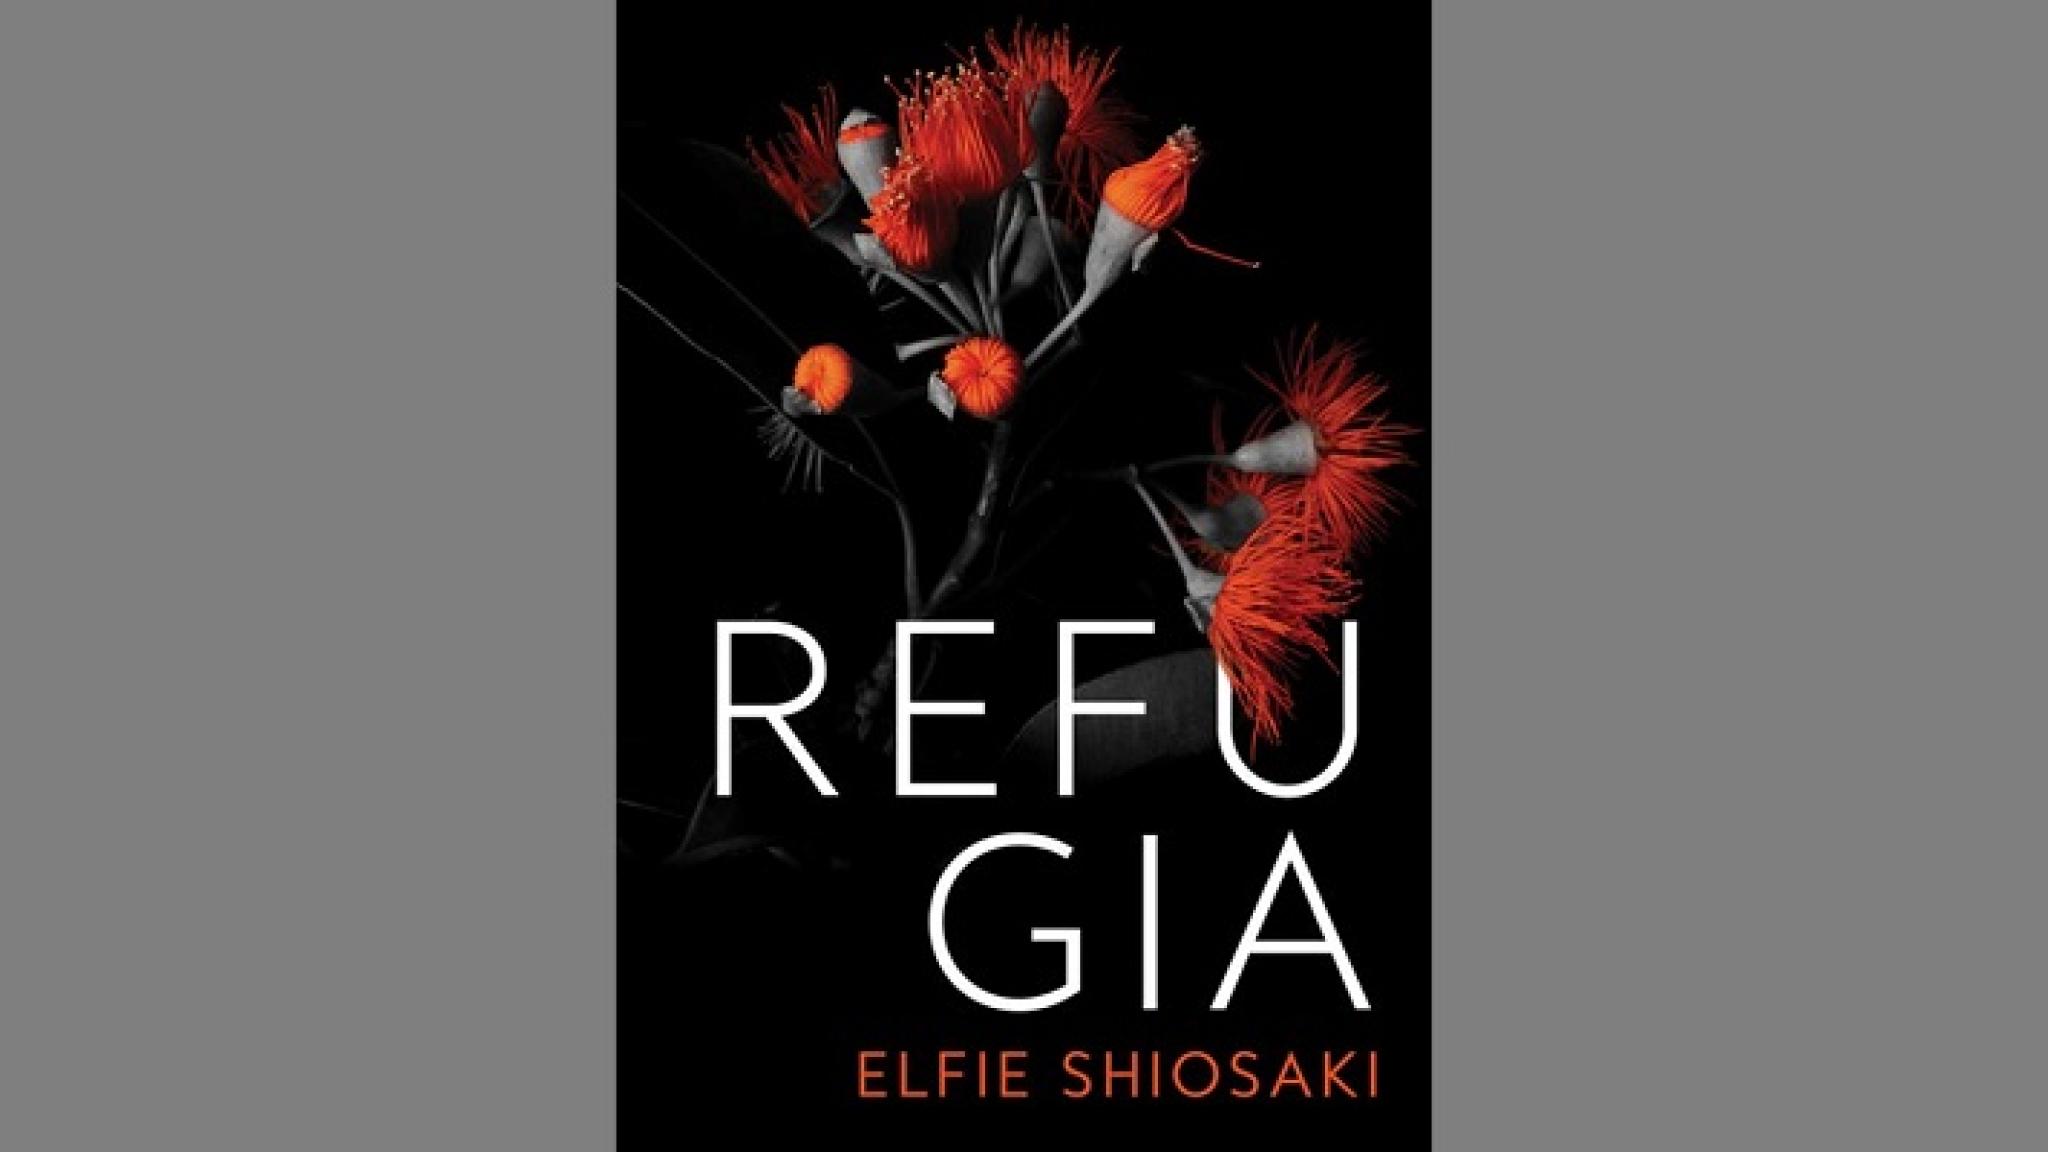 Image of ‘Refugia’ book cover from https://magabala.com.au/products/refugia, used with permission of the author.   